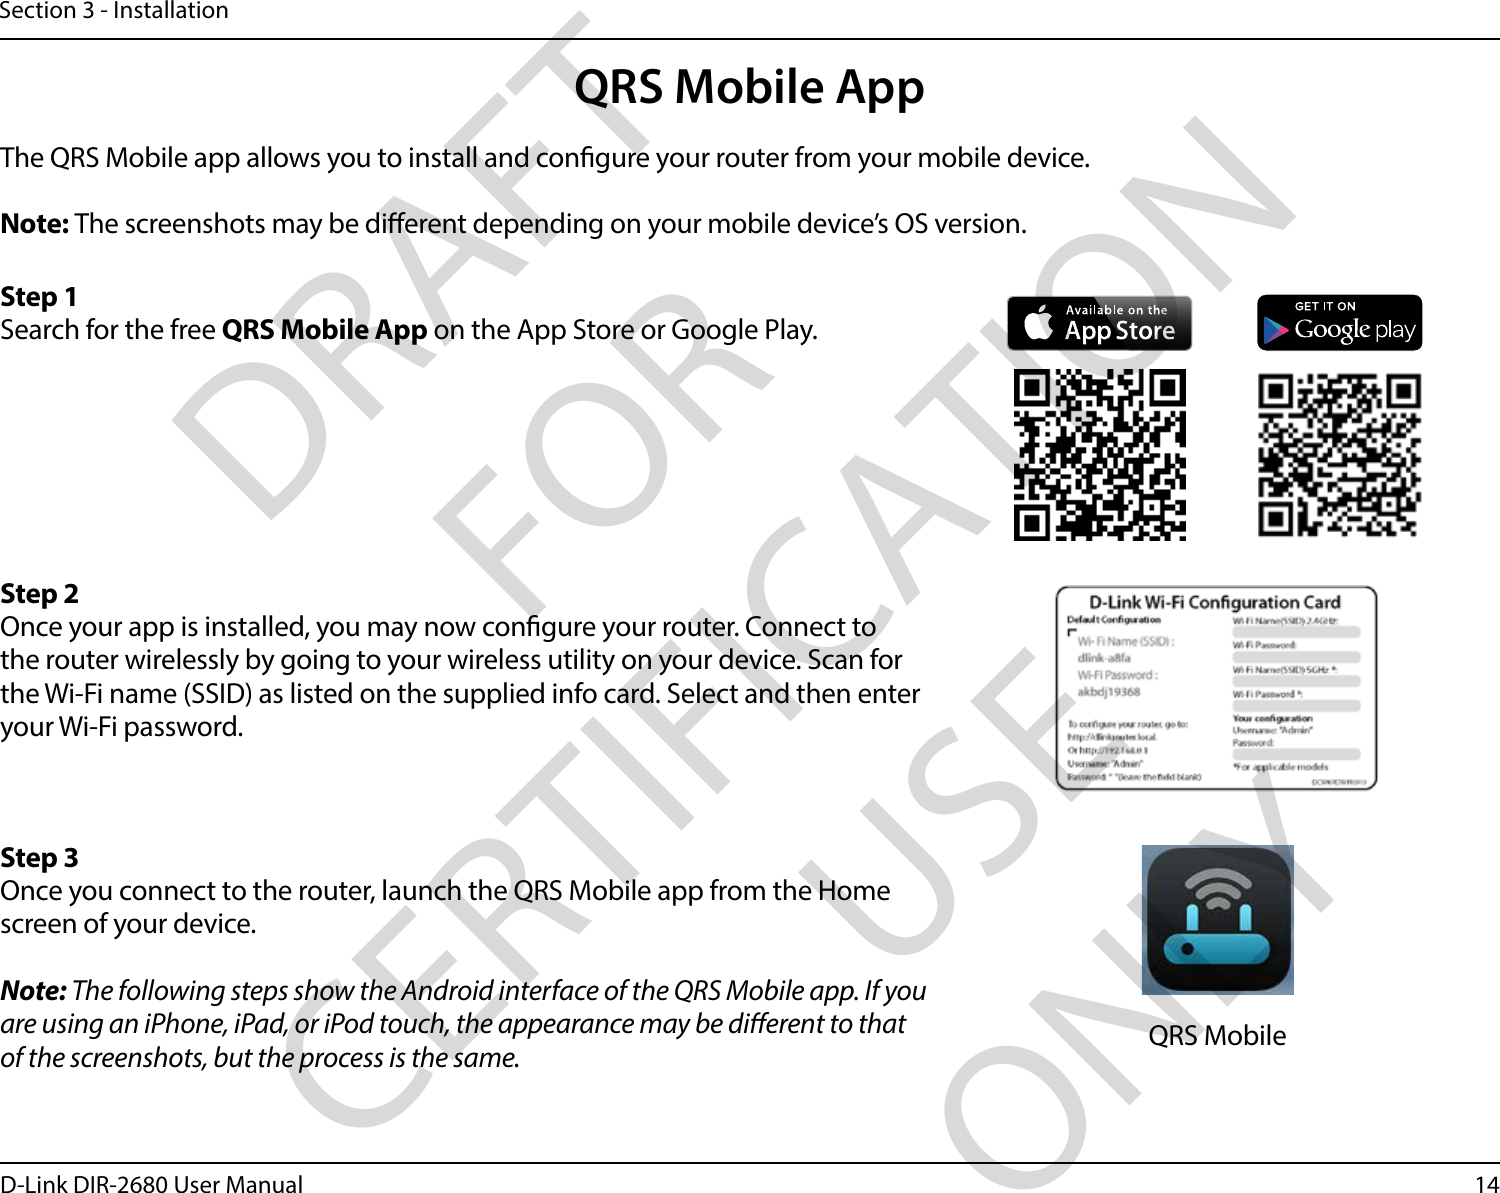 14D-Link DIR-2680 User ManualSection 3 - InstallationQRS Mobile AppThe QRS Mobile app allows you to install and congure your router from your mobile device.Note: The screenshots may be dierent depending on your mobile device’s OS version. Step 1Search for the free QRS Mobile App on the App Store or Google Play.Step 2Once your app is installed, you may now congure your router. Connect to the router wirelessly by going to your wireless utility on your device. Scan for the Wi-Fi name (SSID) as listed on the supplied info card. Select and then enter your Wi-Fi password.Step 3Once you connect to the router, launch the QRS Mobile app from the Home screen of your device.Note: The following steps show the Android interface of the QRS Mobile app. If you are using an iPhone, iPad, or iPod touch, the appearance may be dierent to that of the screenshots, but the process is the same. QRS MobileDRAFT FOR CERTIFICATION USE ONLY